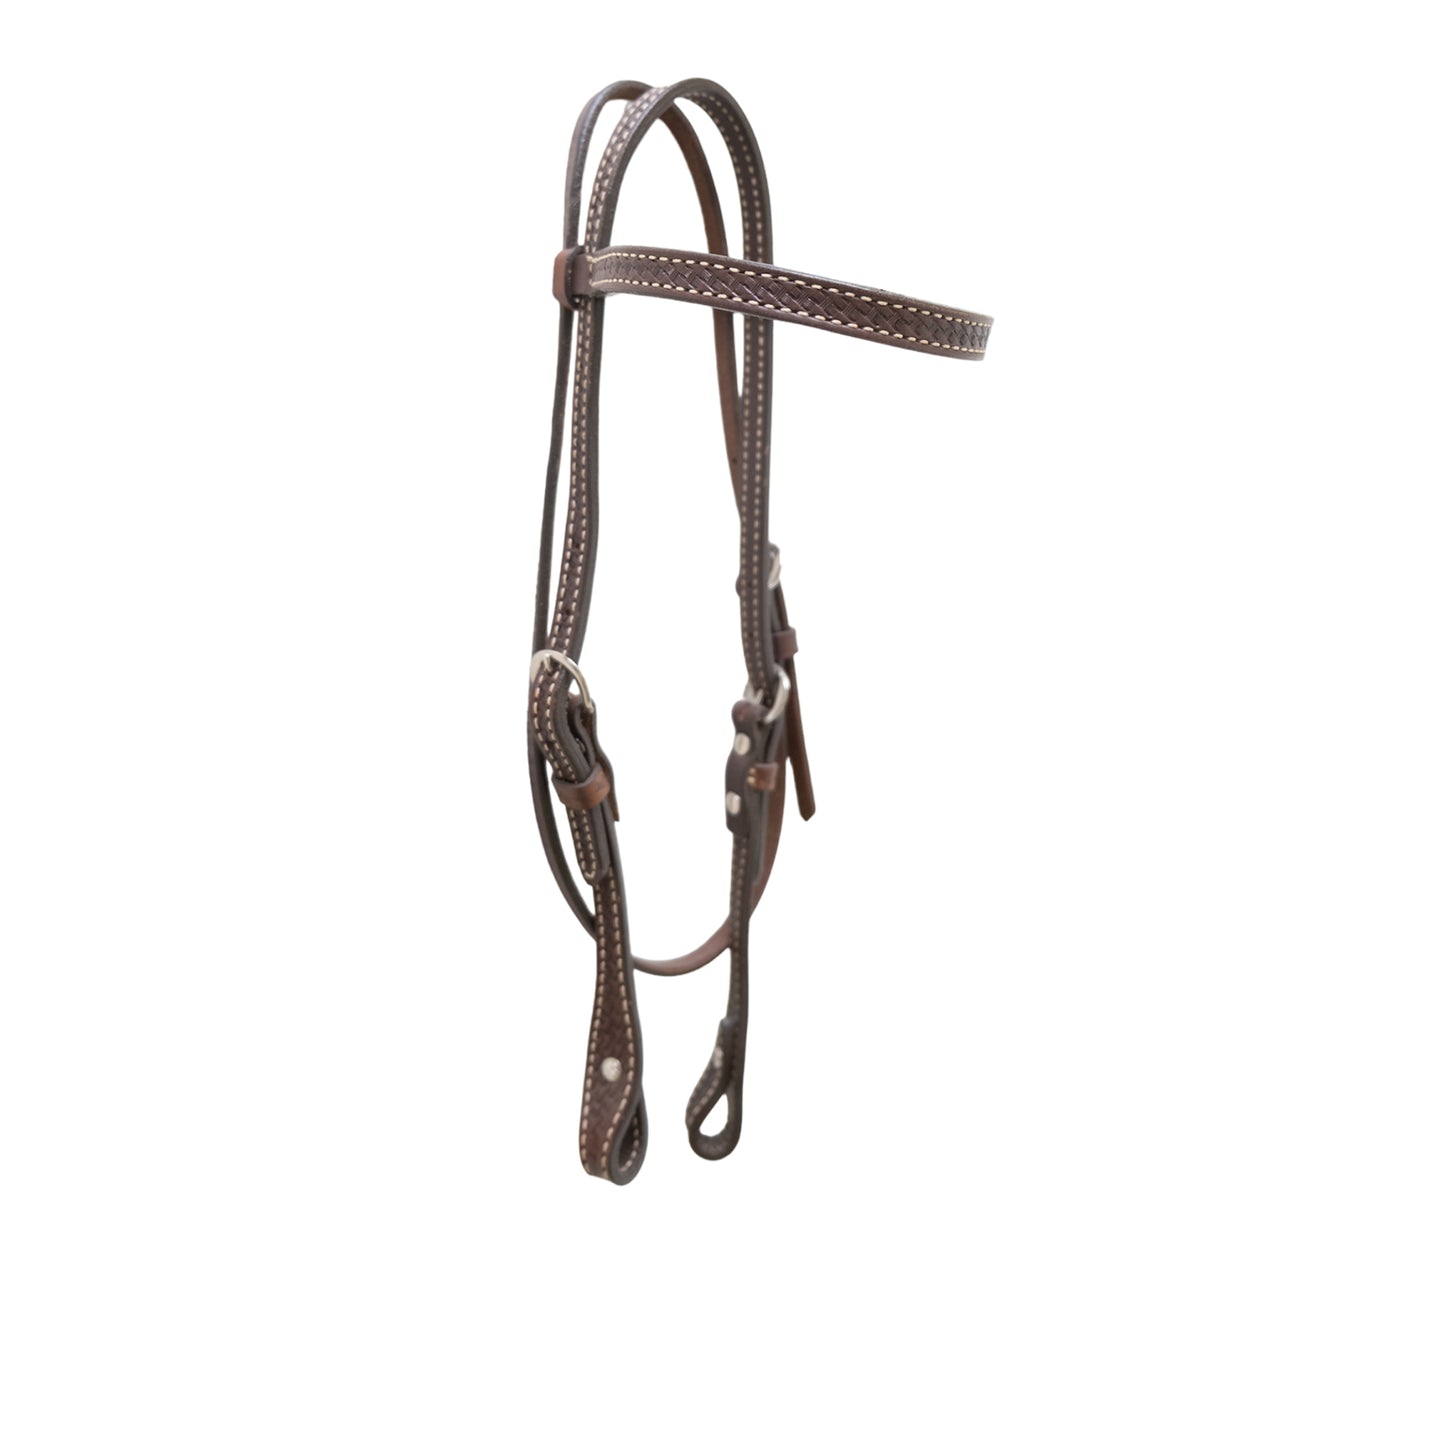 1/2" Straight browband headstall chocolate leather basket tooled.